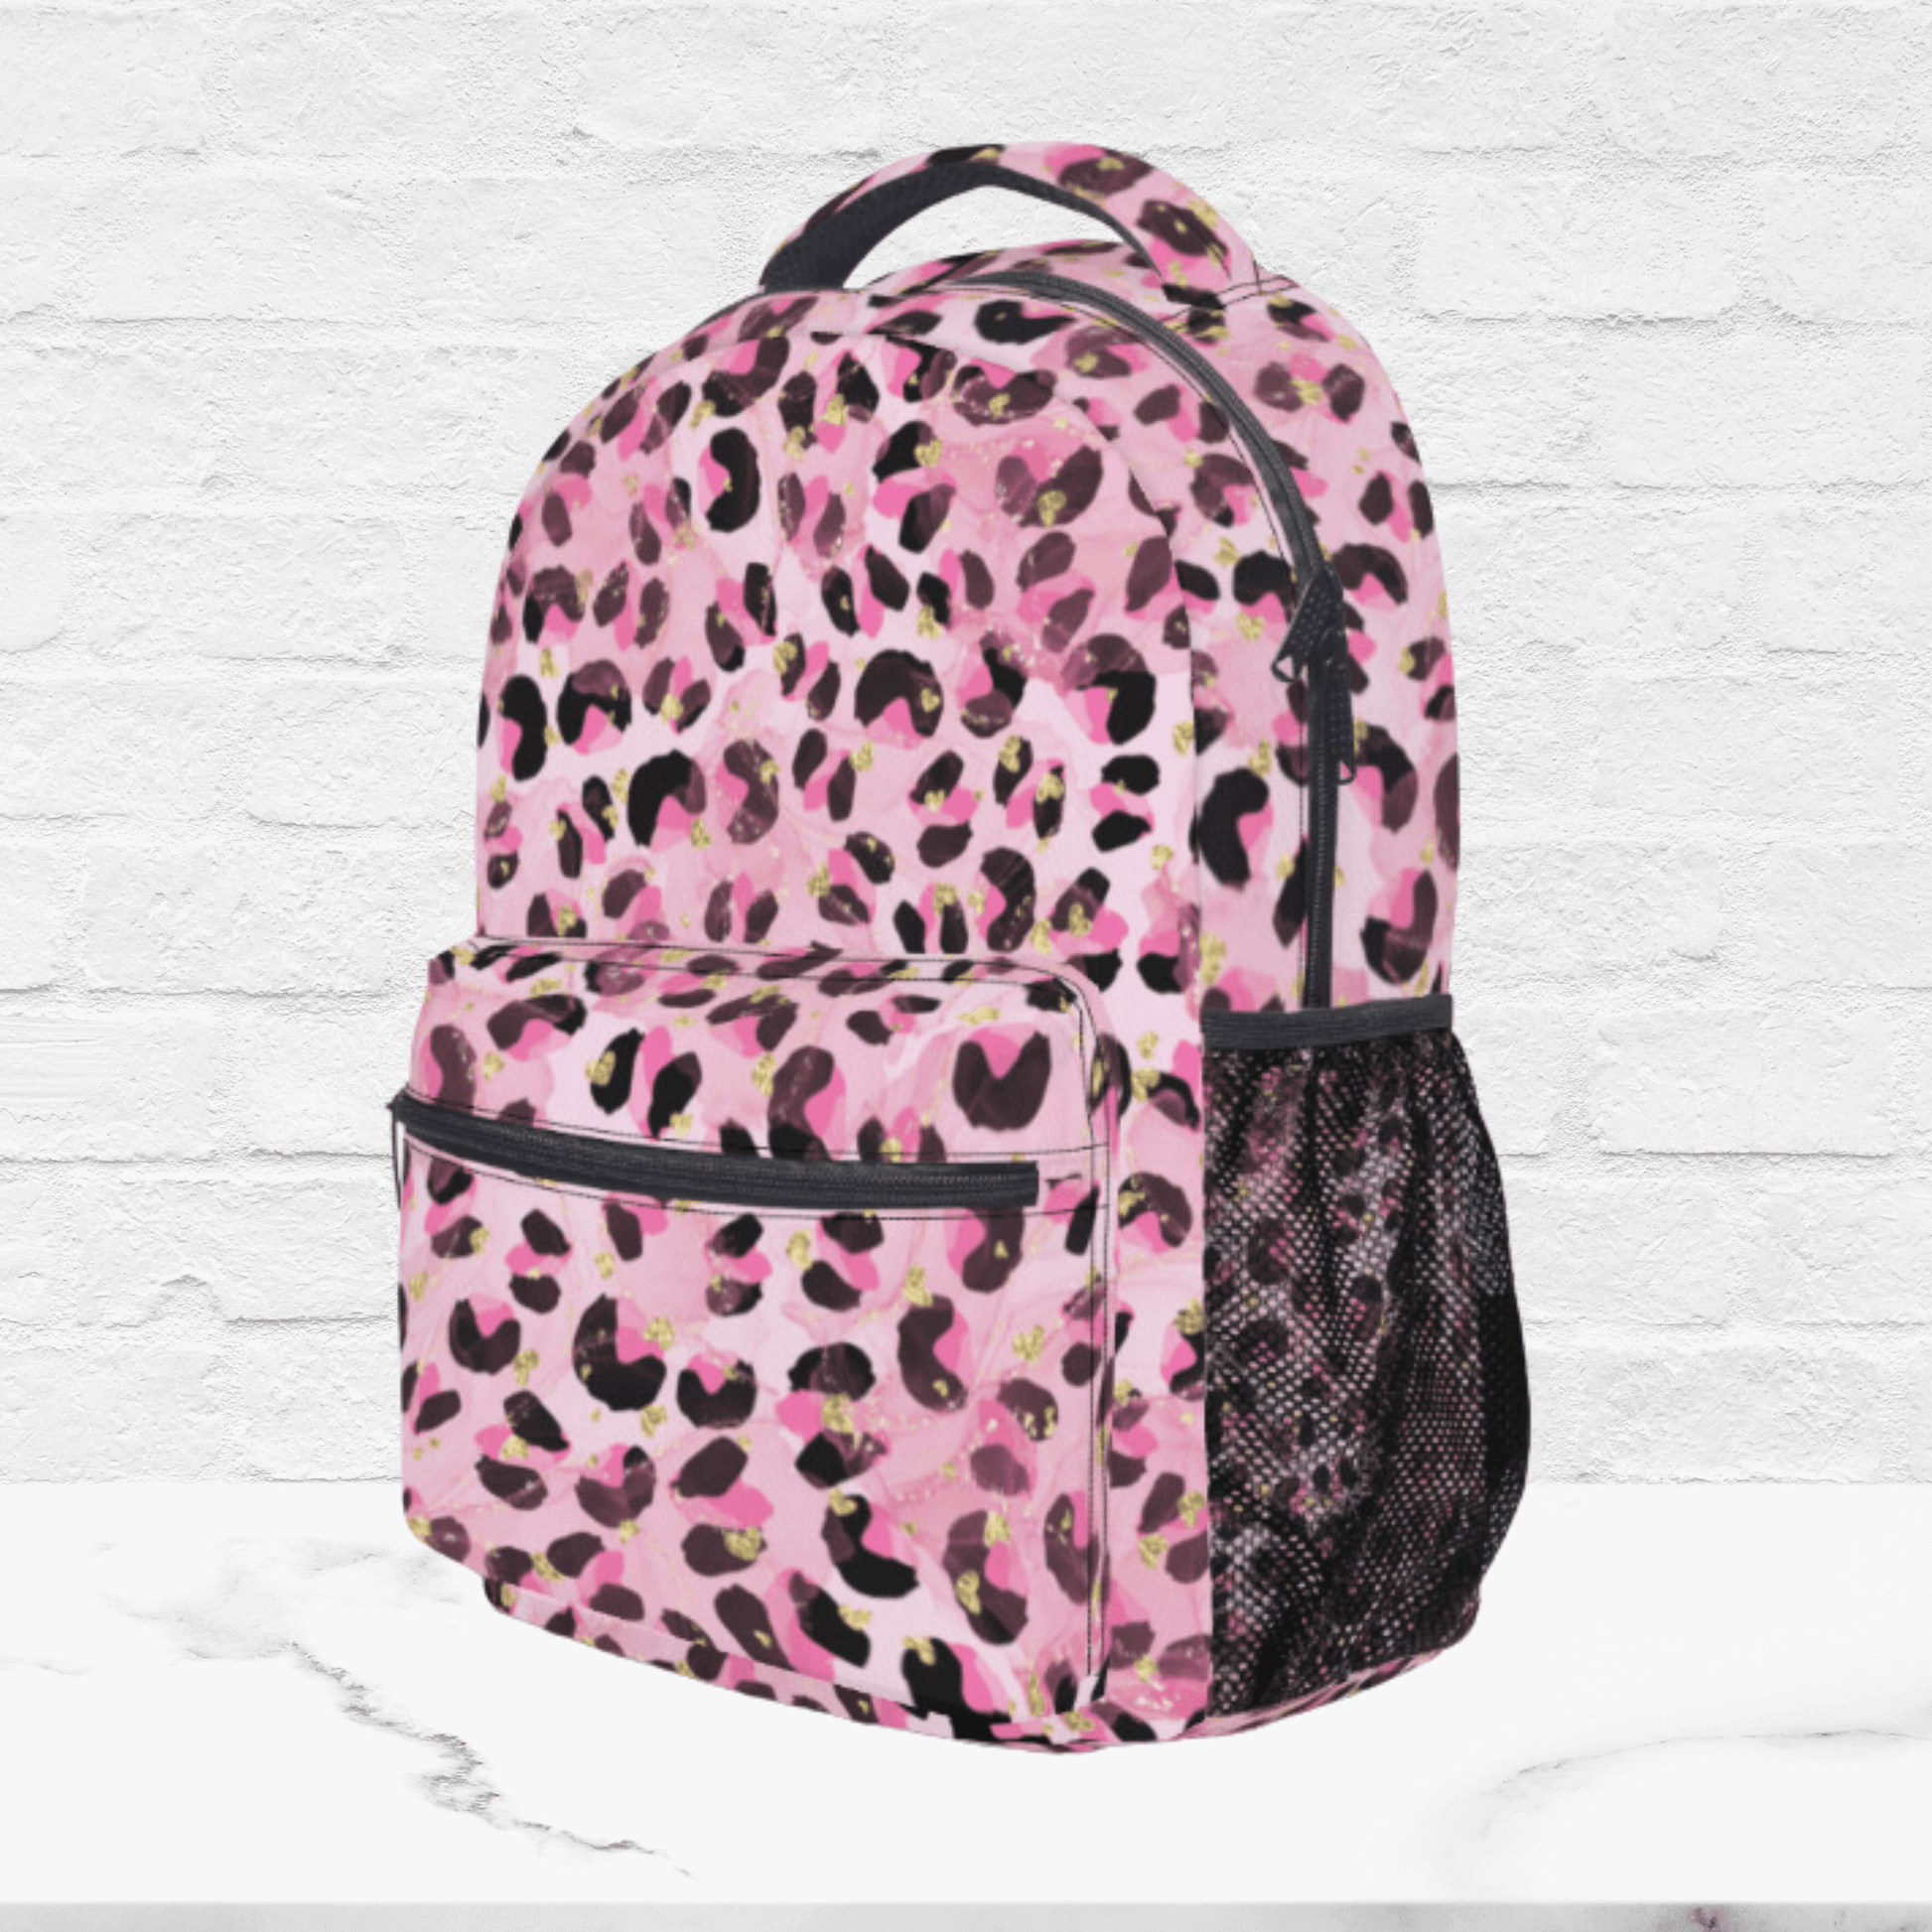 The side of the pink back to school backpack shows a black mesh pocket for water bottles or additional storage.